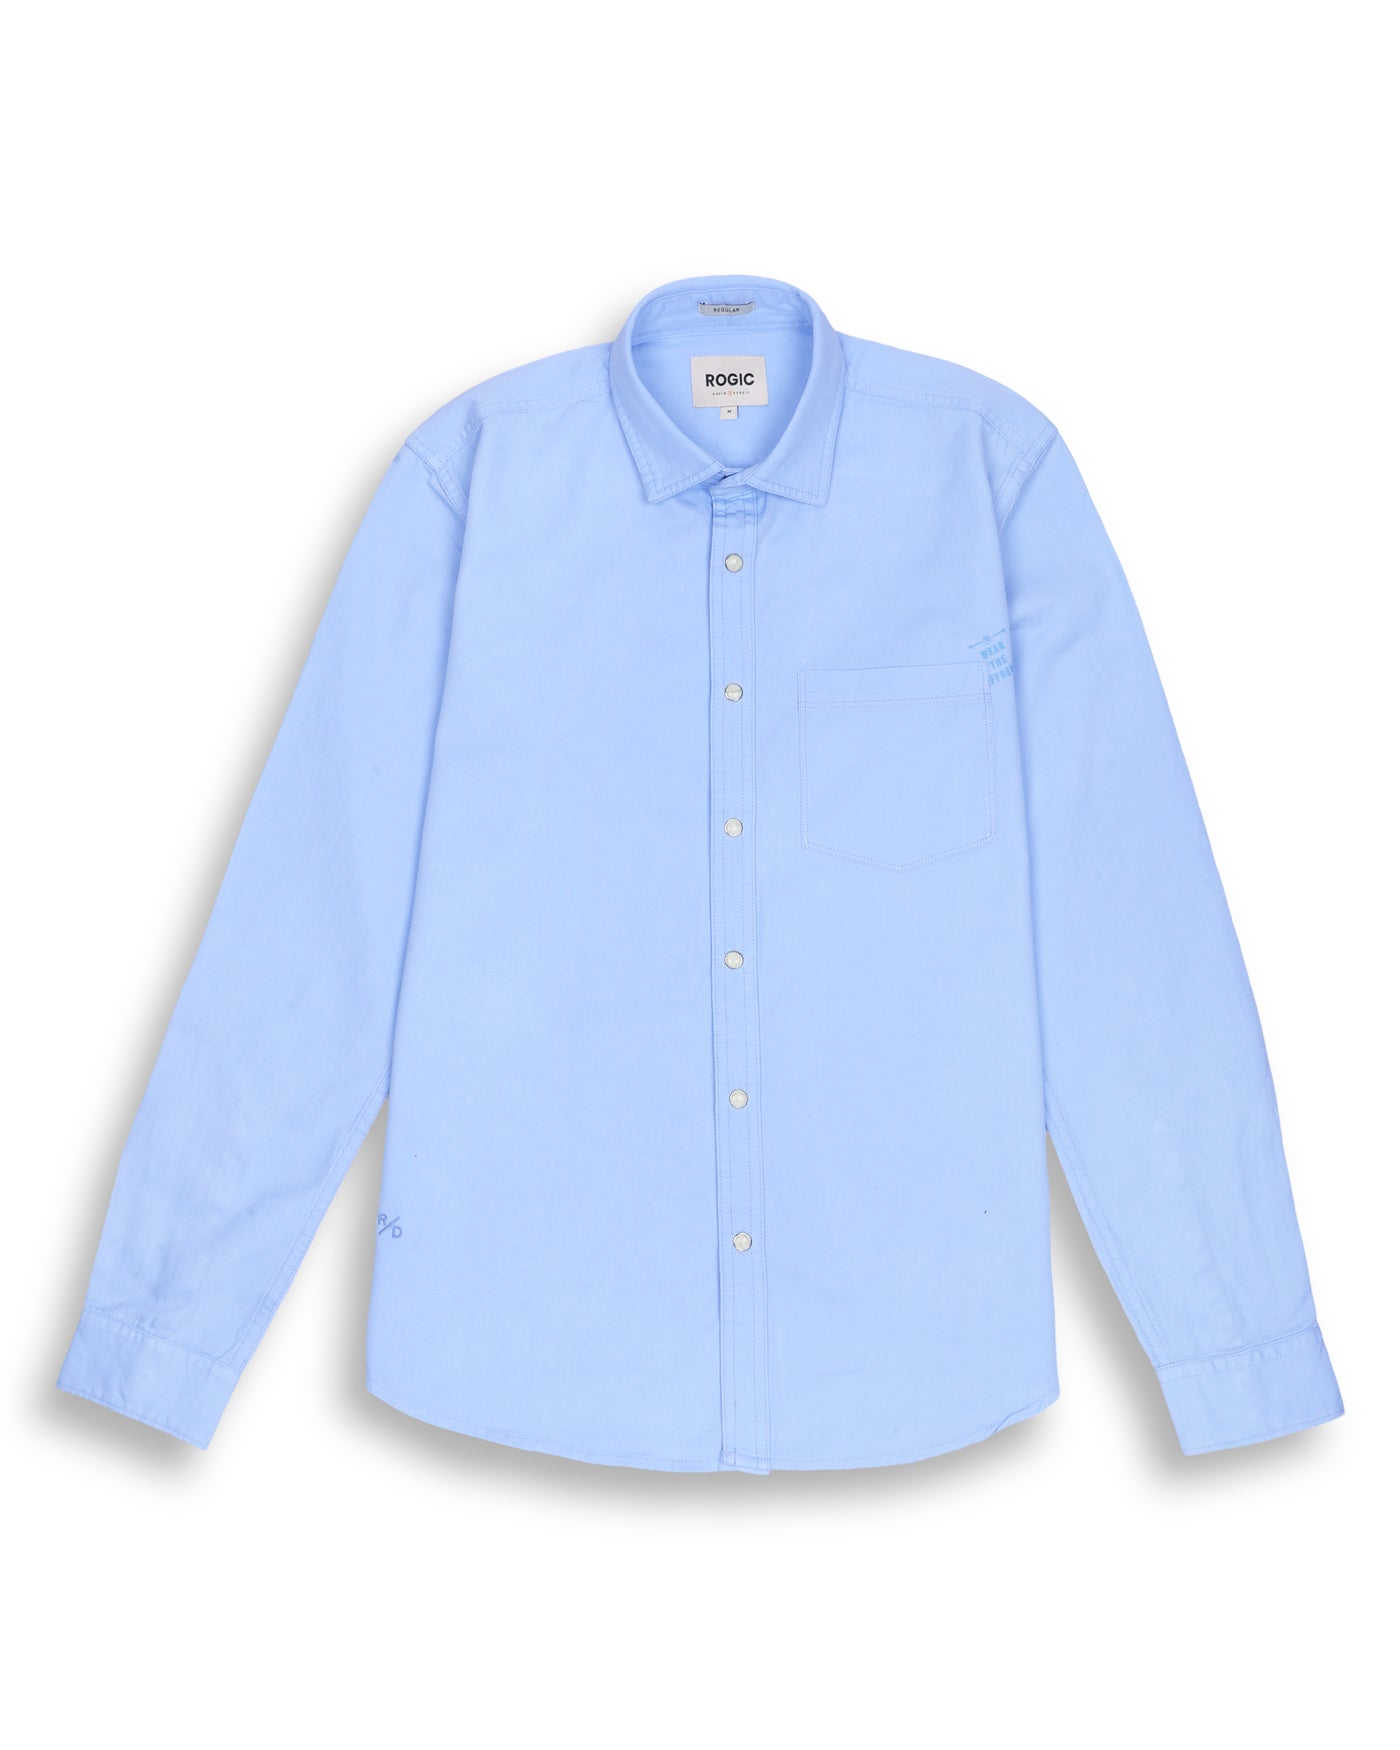 SOLID SHIRT IN LT BLUE